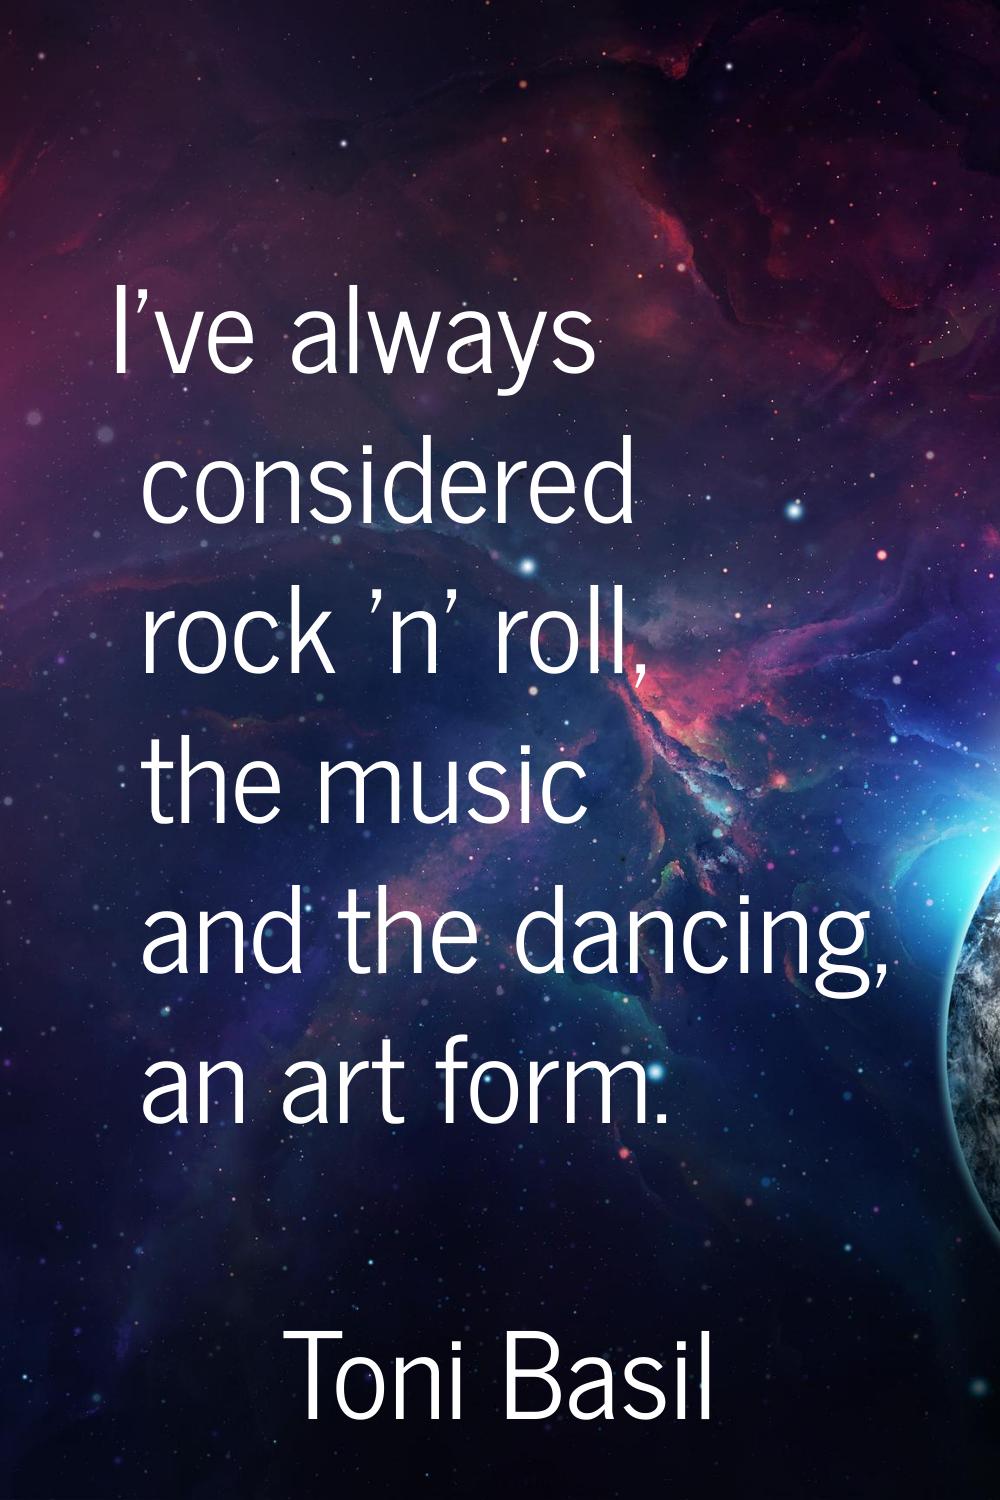 I've always considered rock 'n' roll, the music and the dancing, an art form.